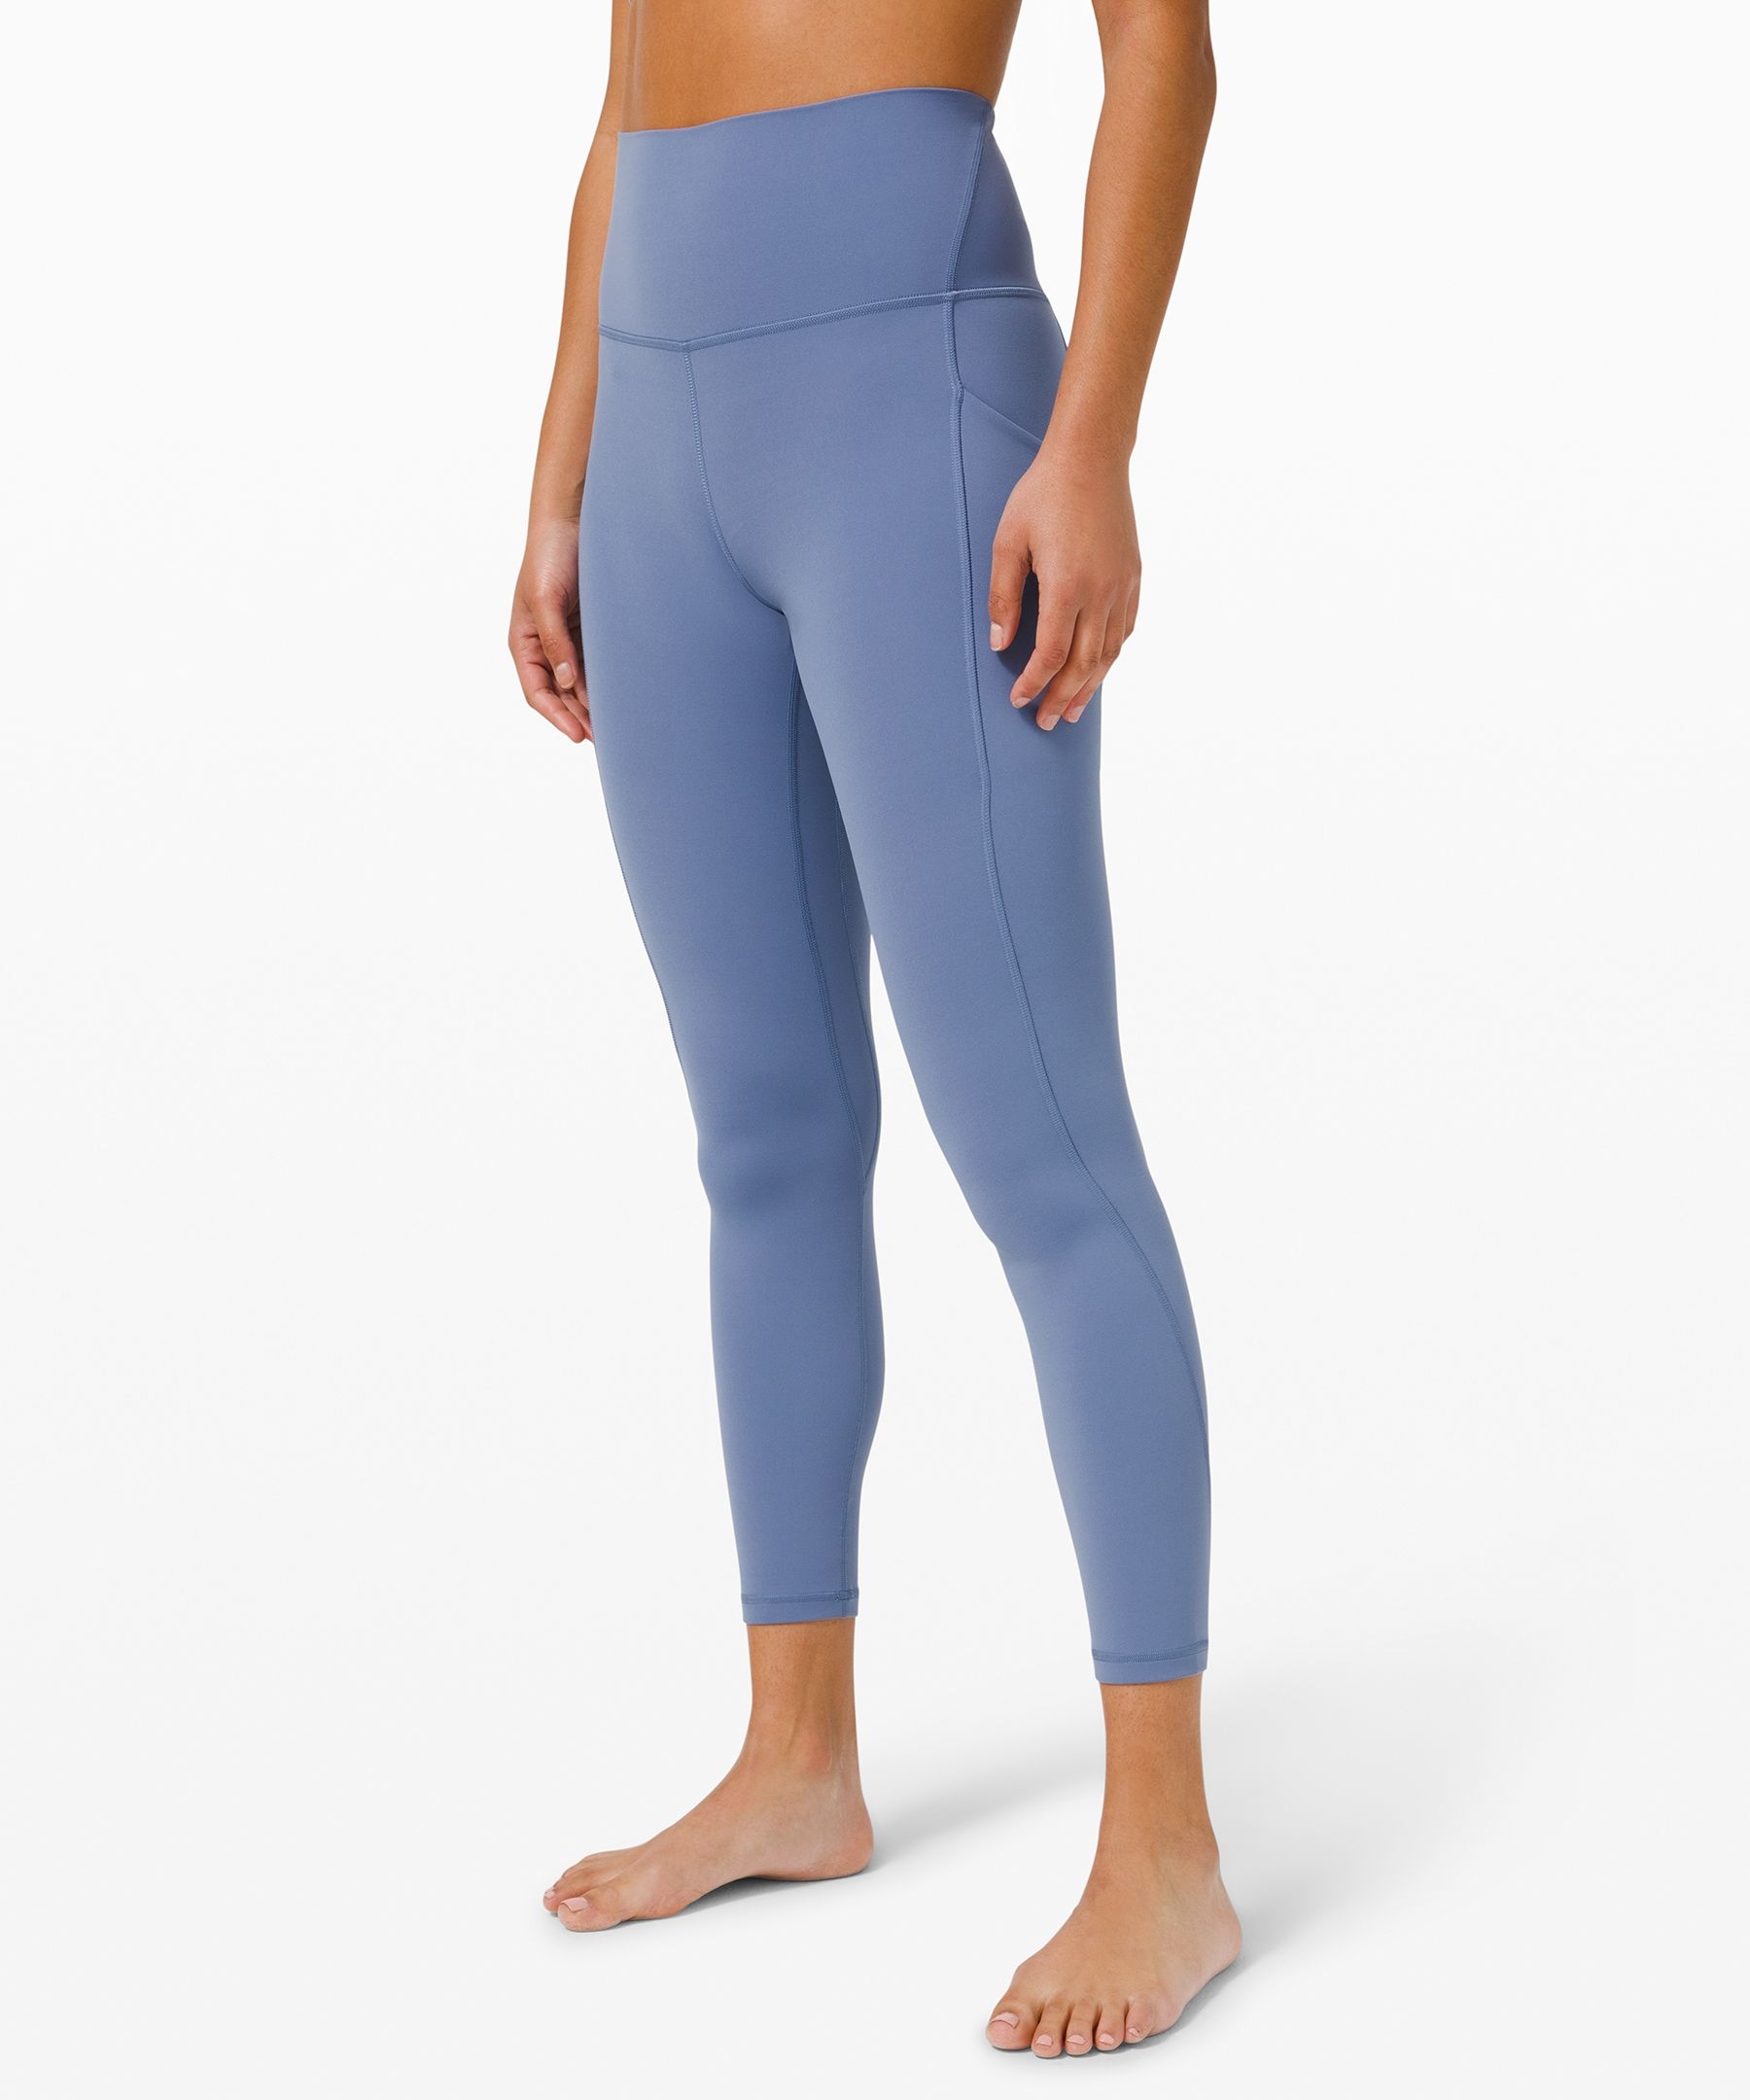 Lululemon Just Dropped Their Bestselling Align Leggings With Pockets - lifestylemed